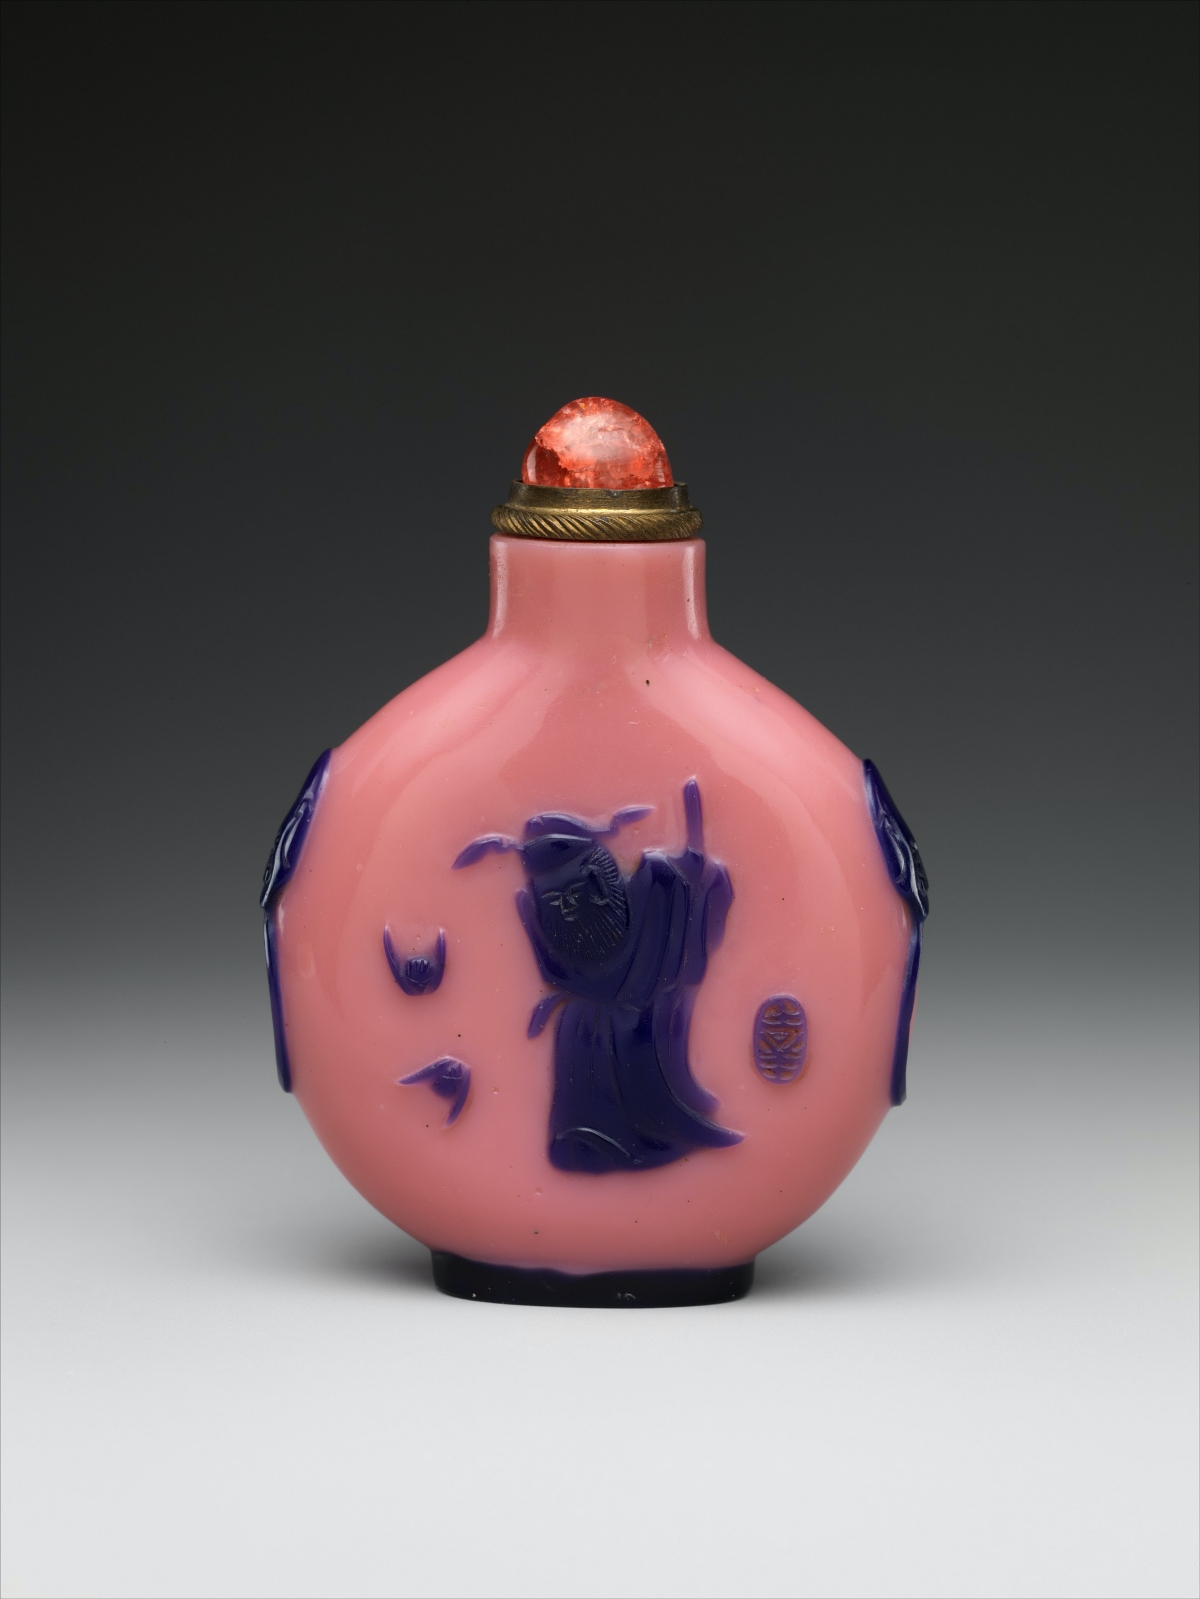 19th century glass snuff bottle depicting Zhong Kui, vanquisher of evil spirits in Chinese mythology